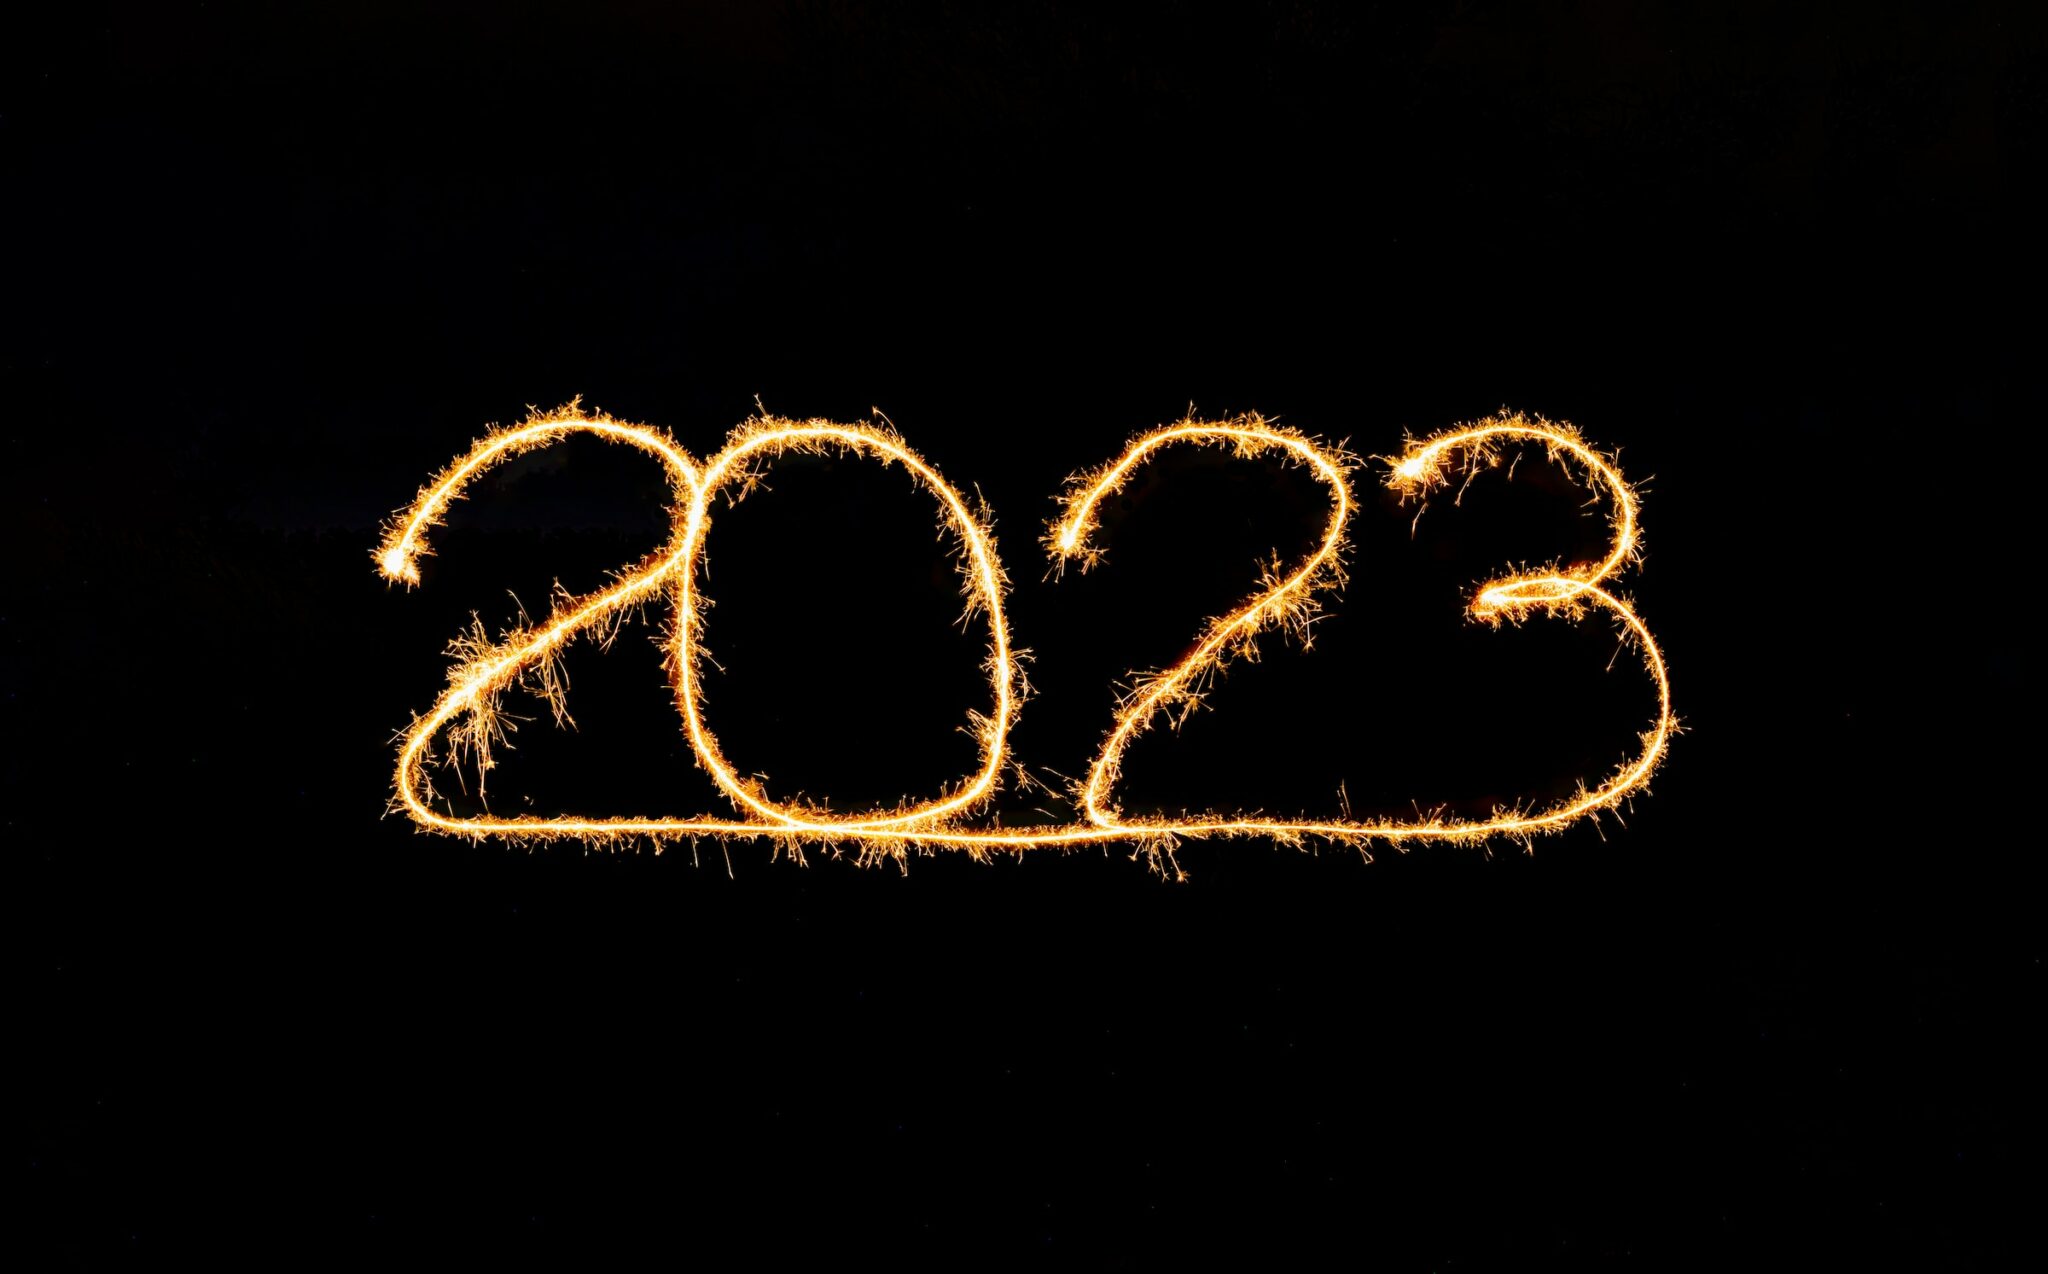 2023 Written with a Sparkler